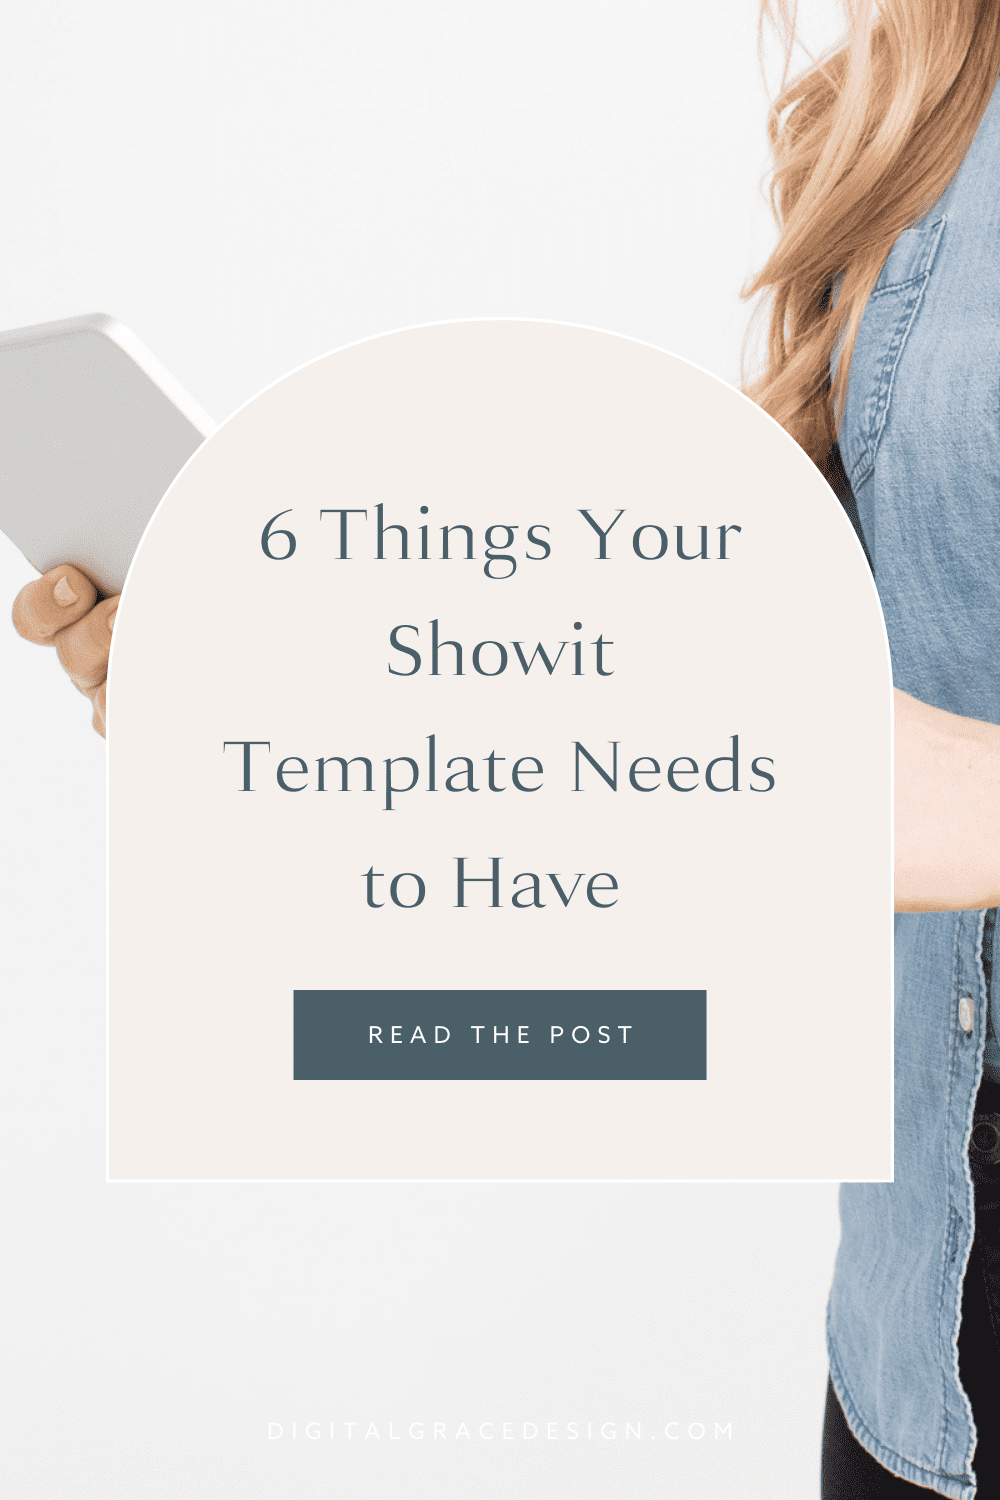 6 Things Your Showit Template Needs to Have